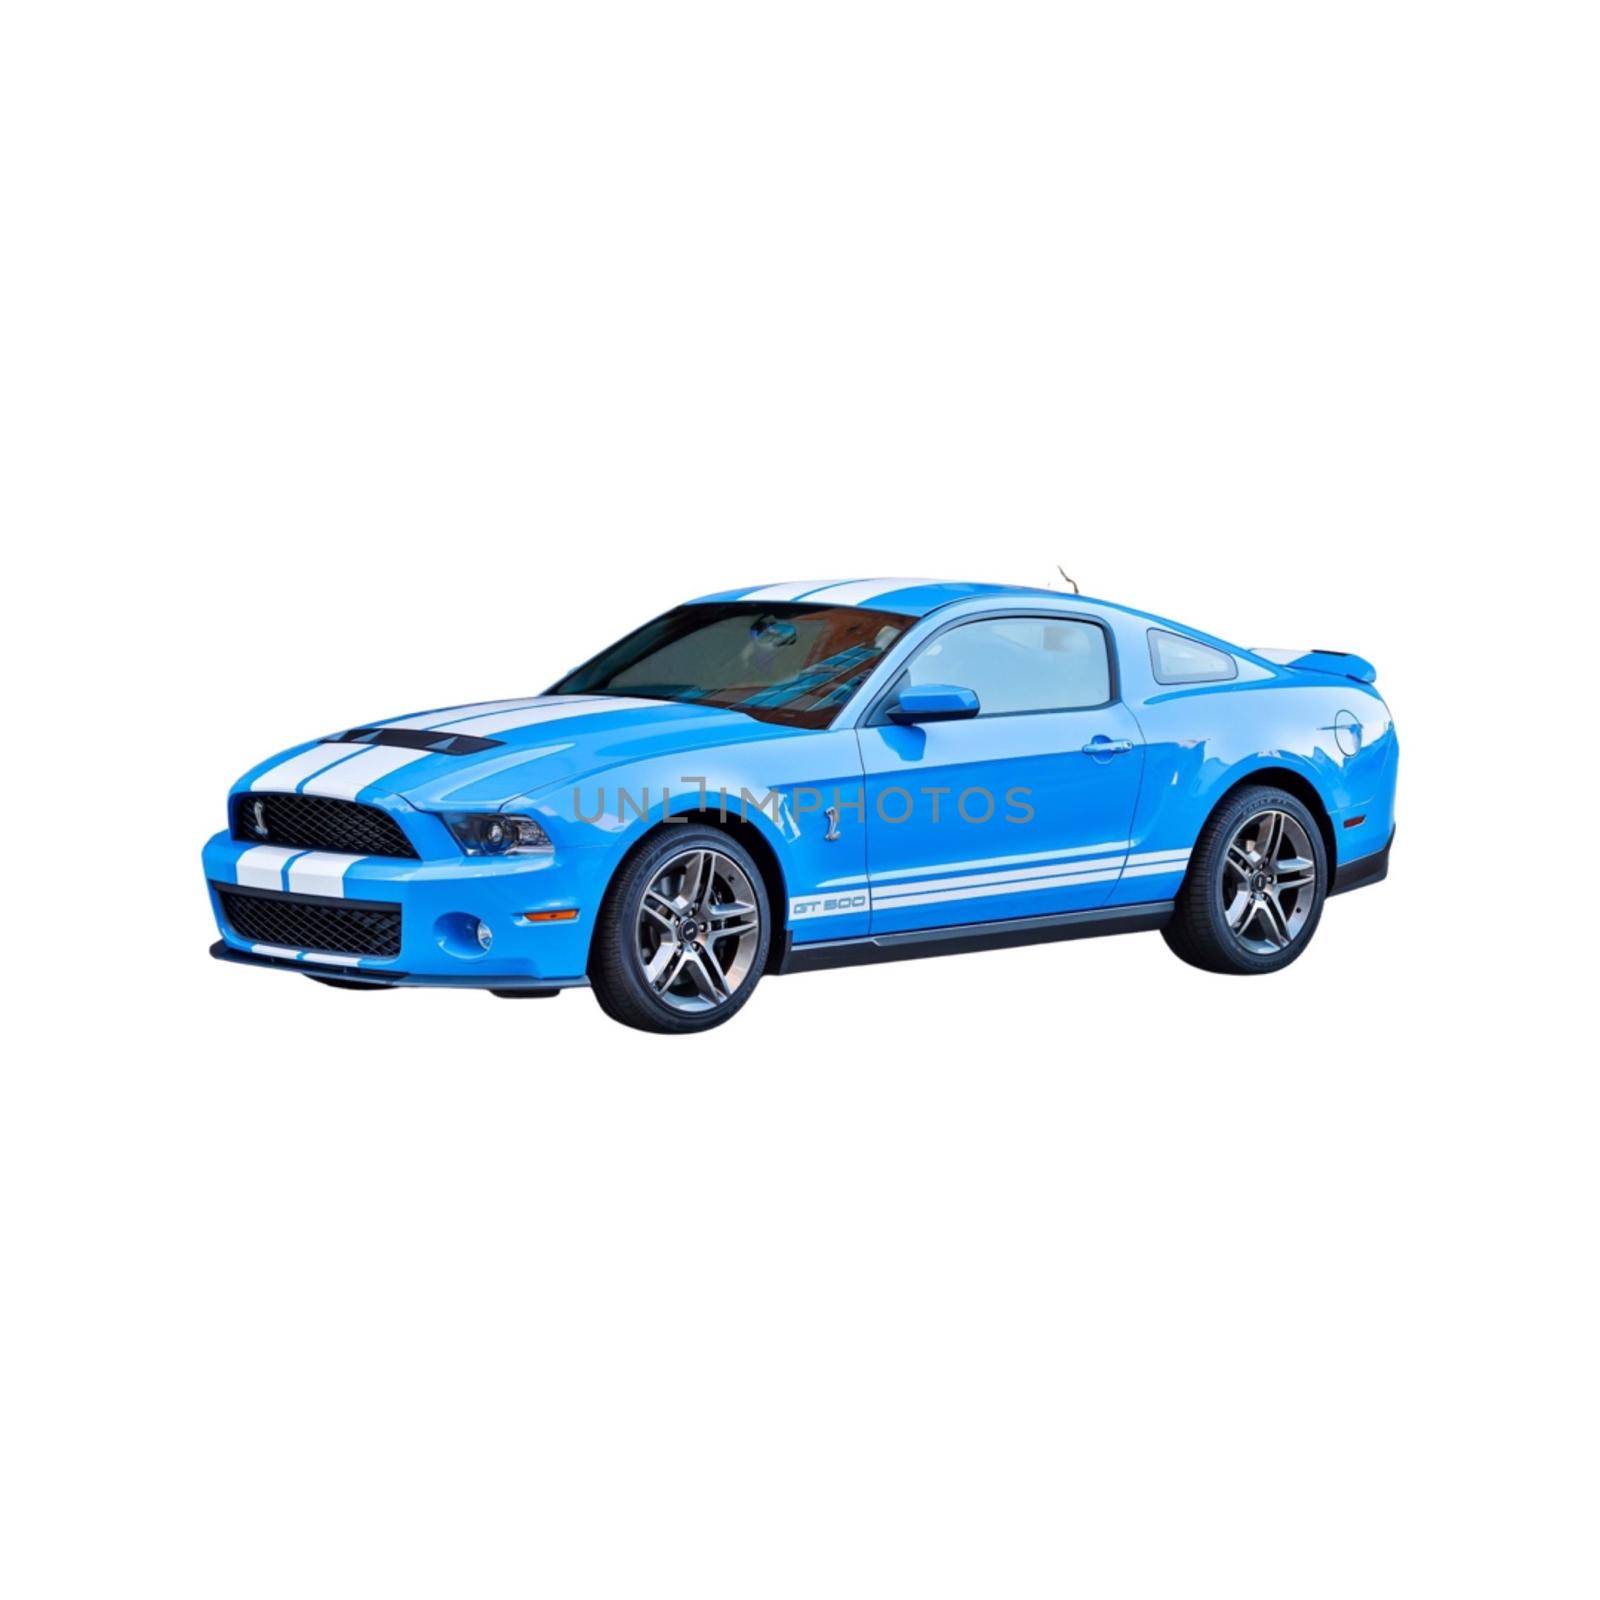 Picture of a Mustang GT500 Shelby by FlyingDoctor